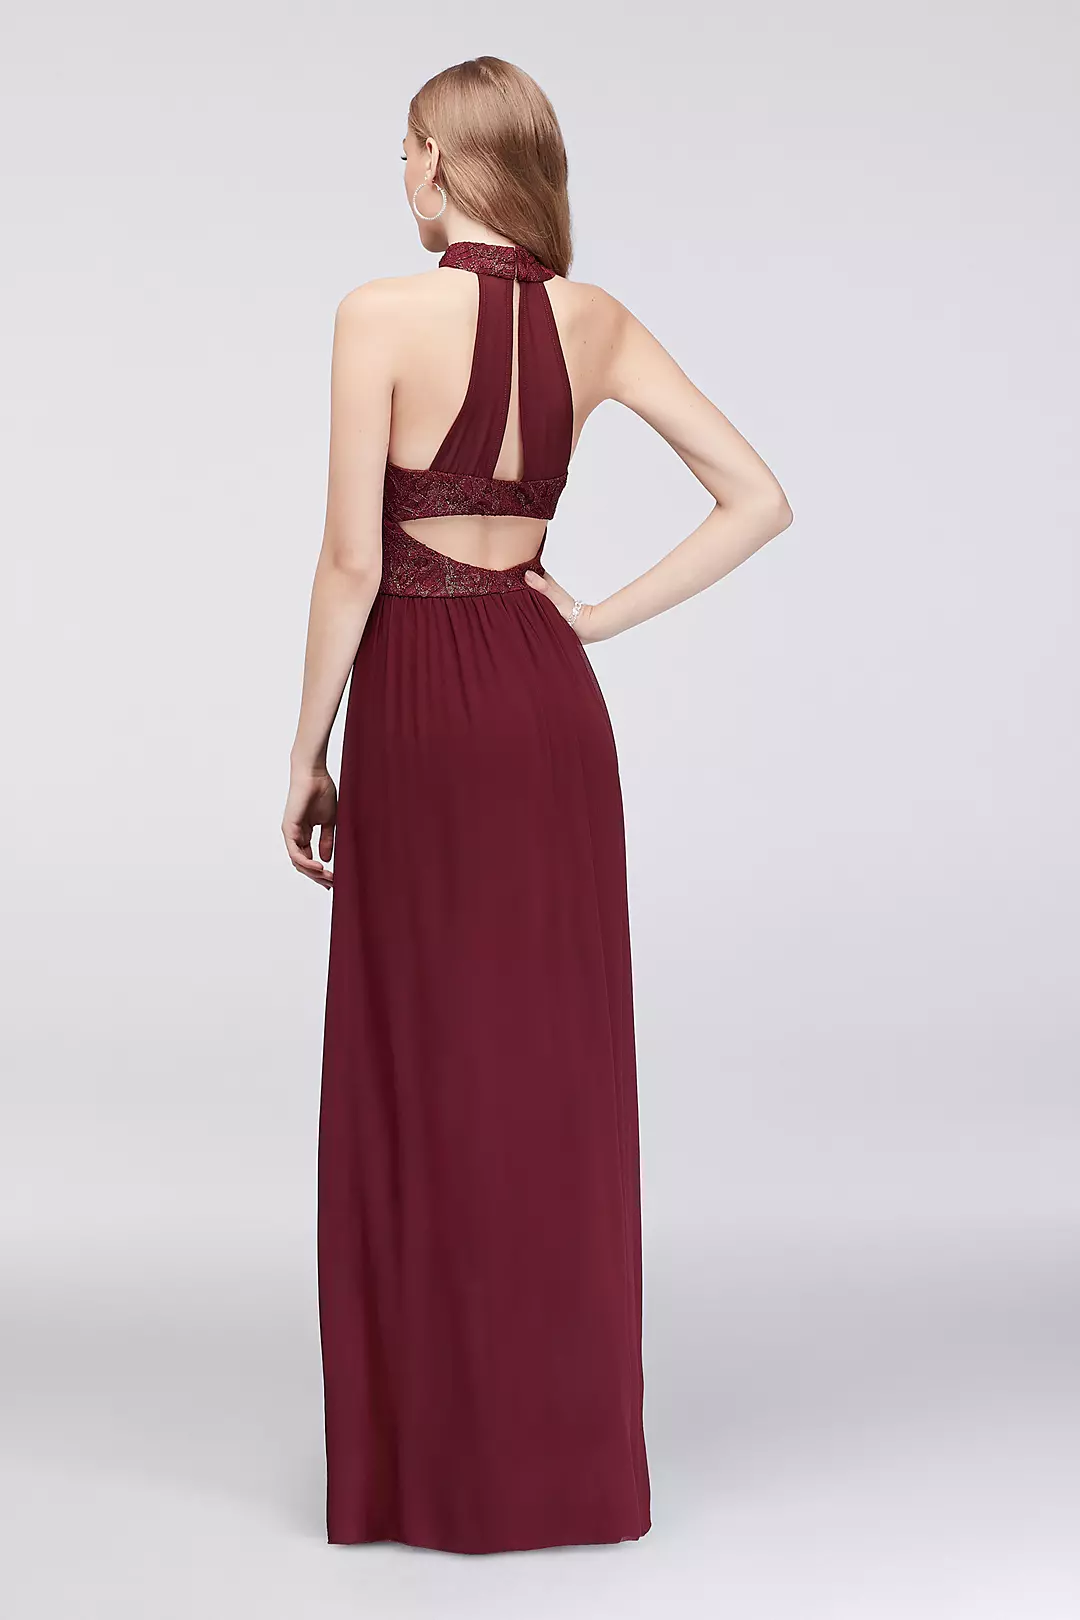 Lace and Chiffon Halter Gown with Back Detail Image 2